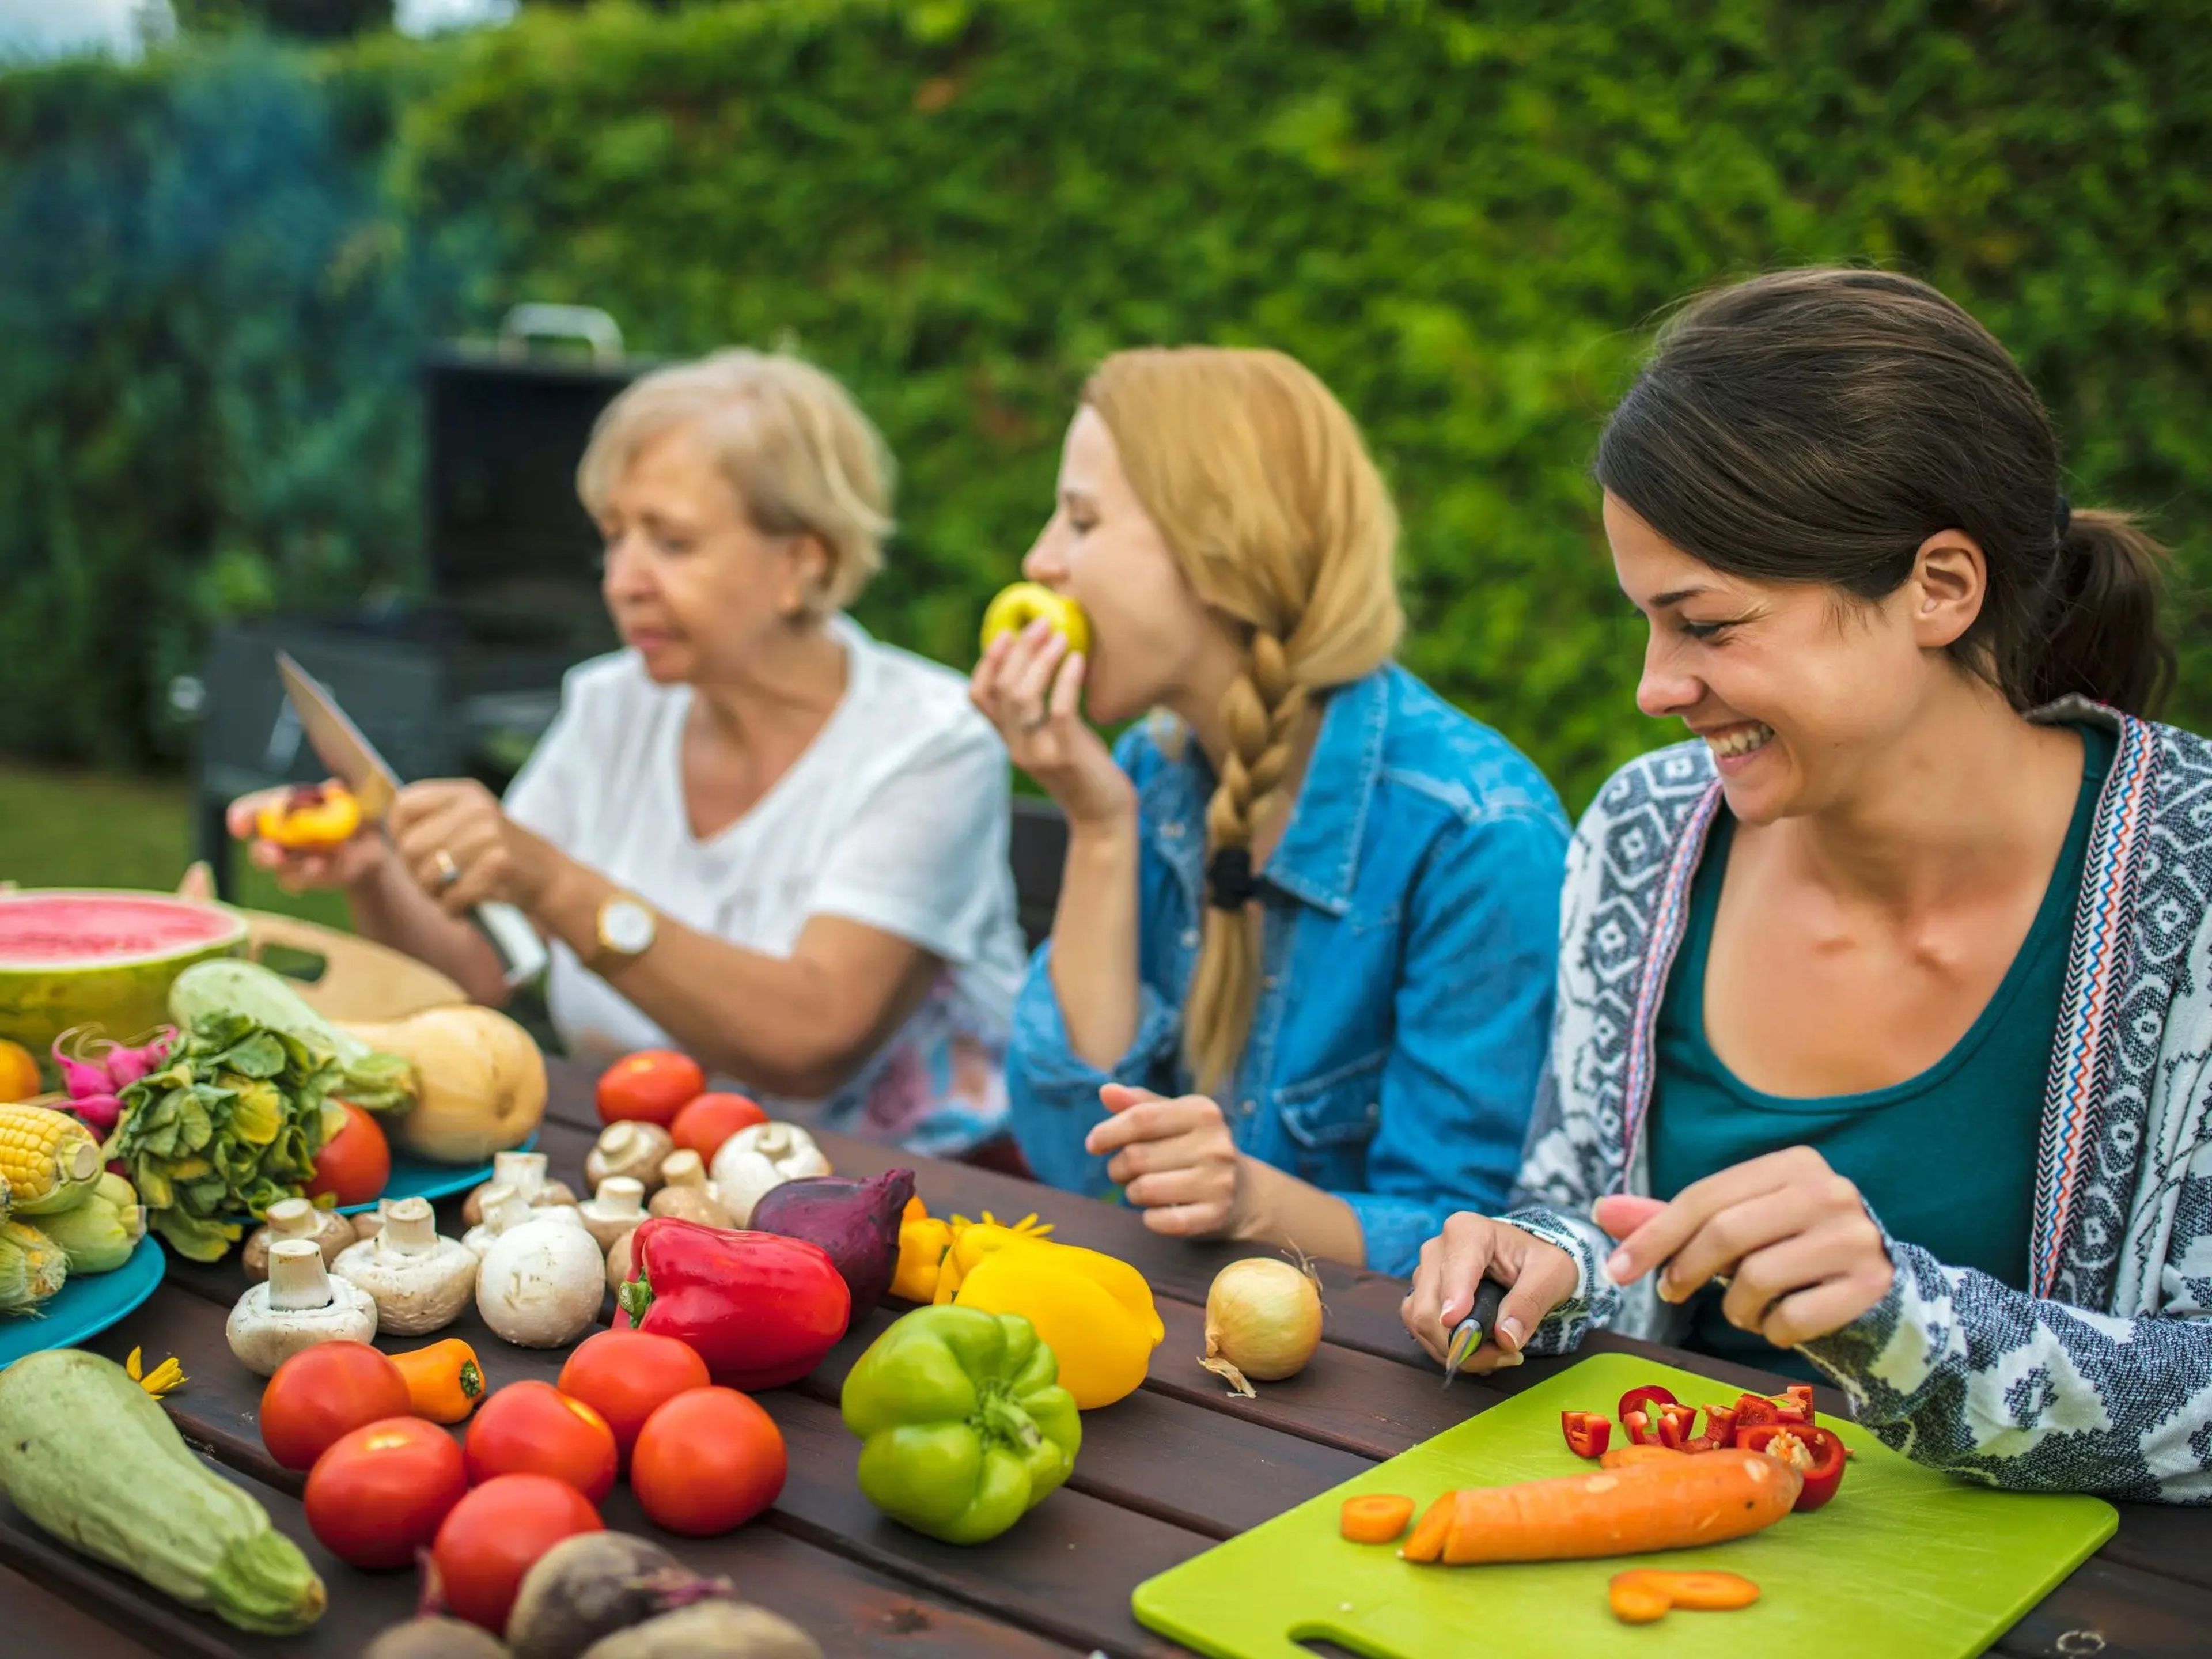 Women eating fruits and vegetables